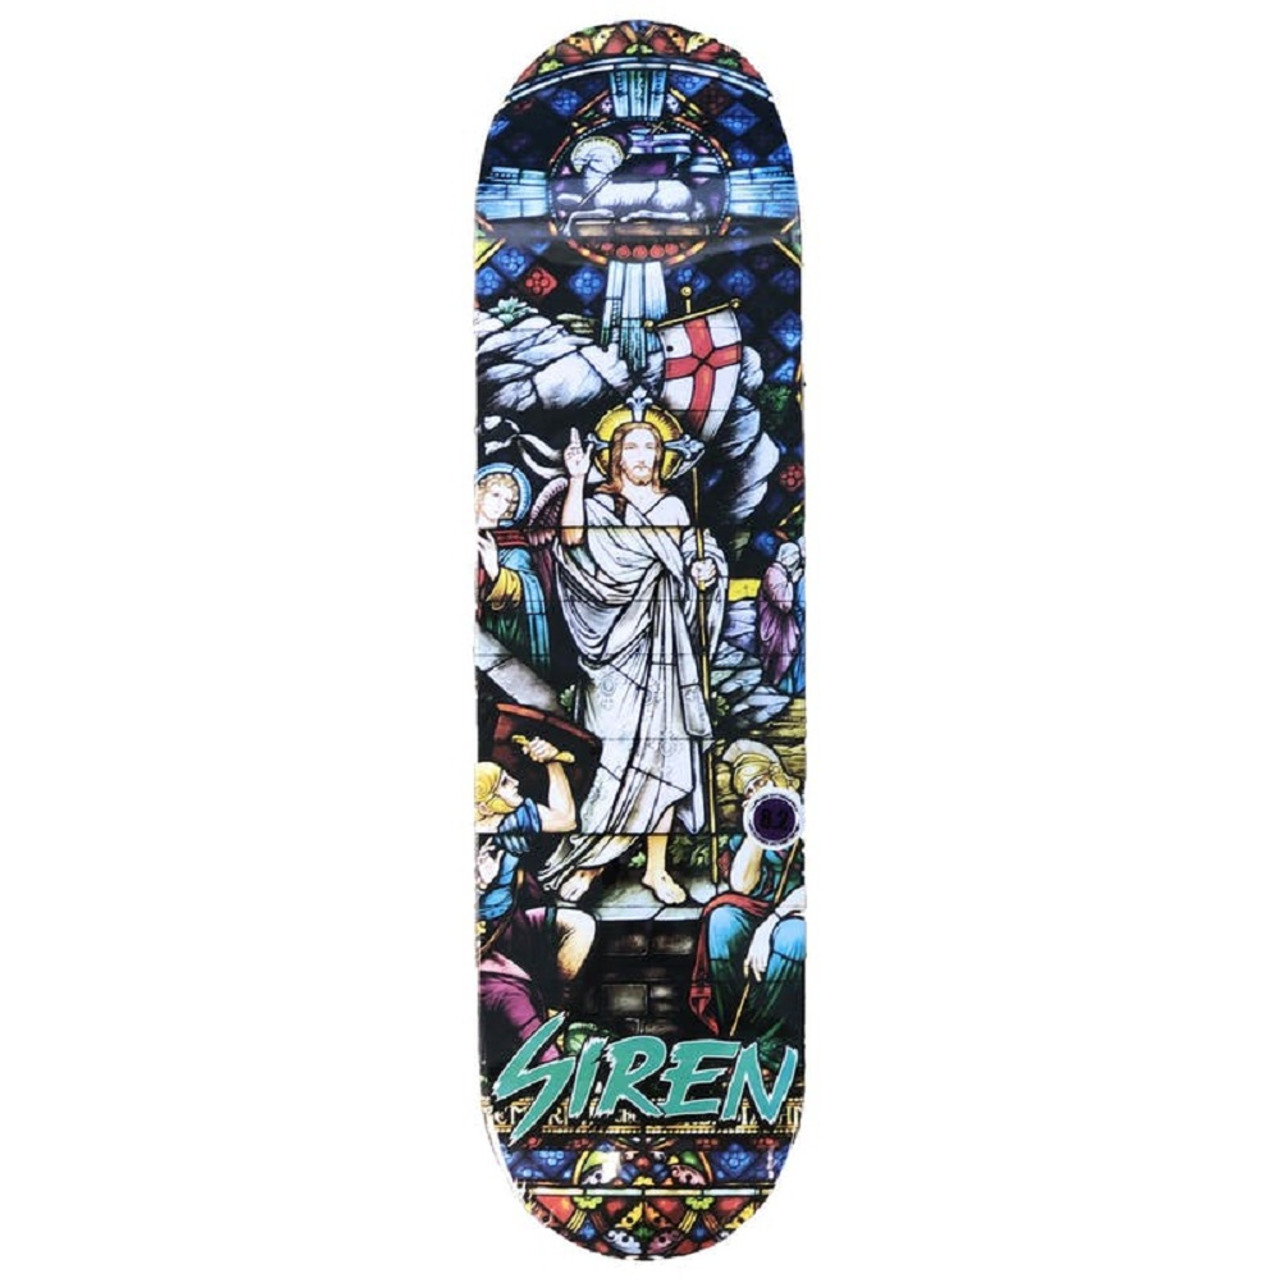 Siren Stained Glass King Skate Deck Jesus Stain 8.25